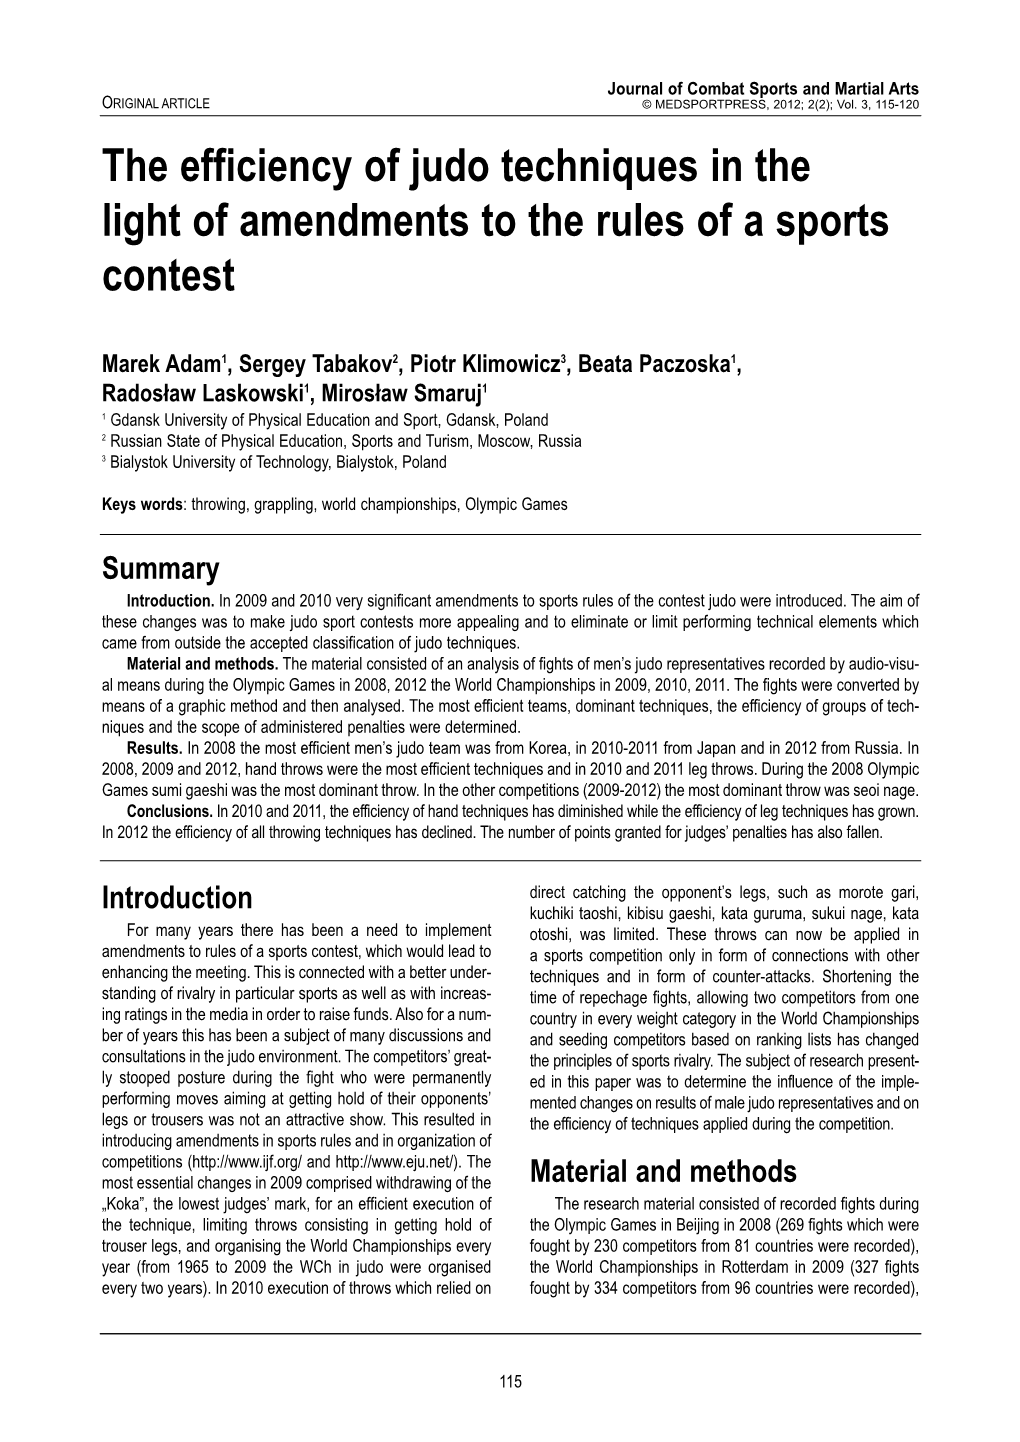 The Efficiency of Judo Techniques in the Light of Amendments to the Rules of a Sports Contest